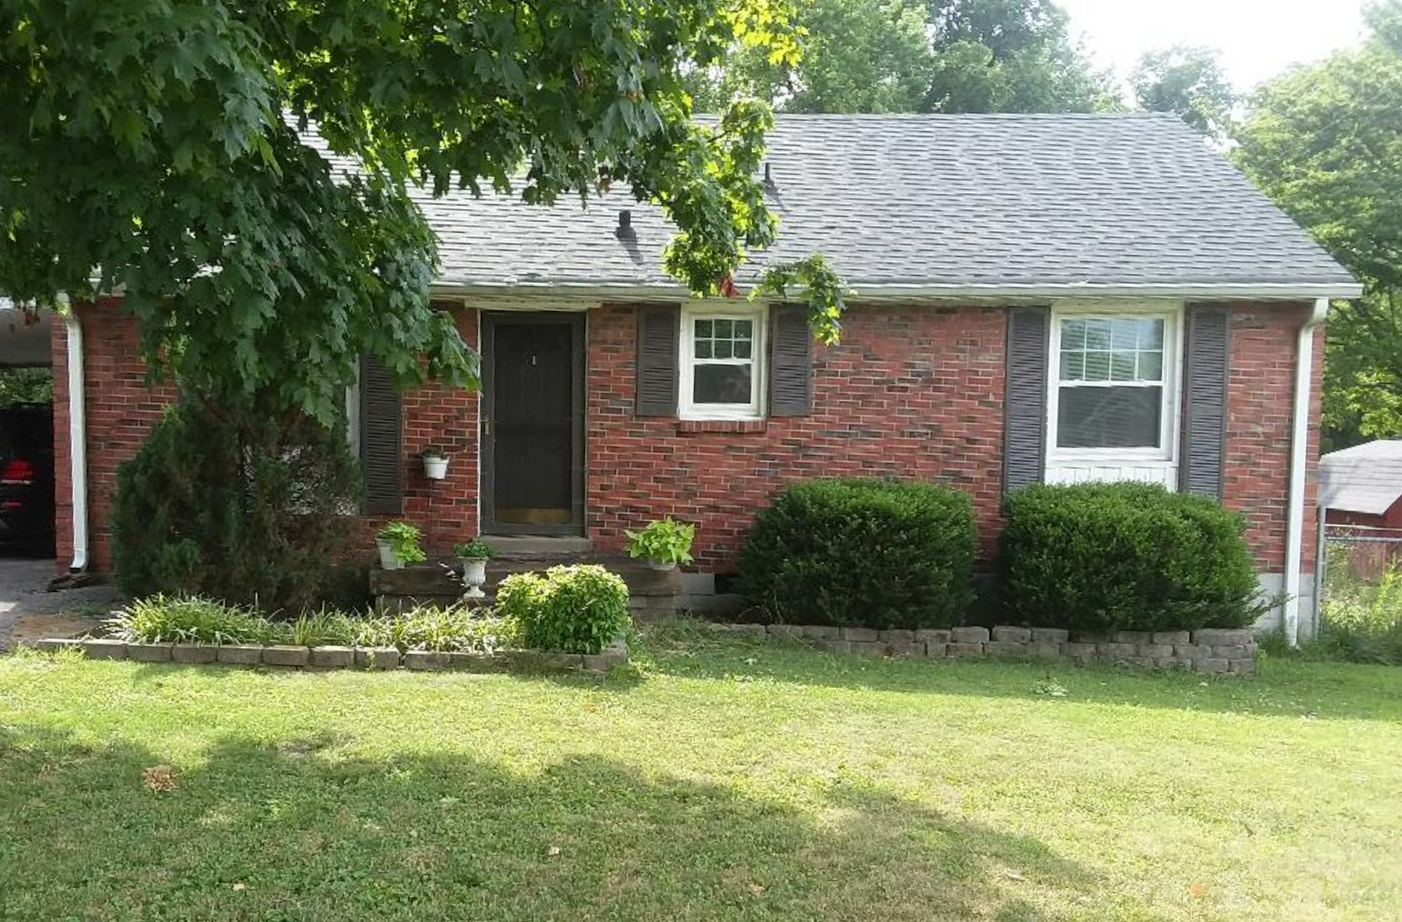 Brick Home – Before & After Before